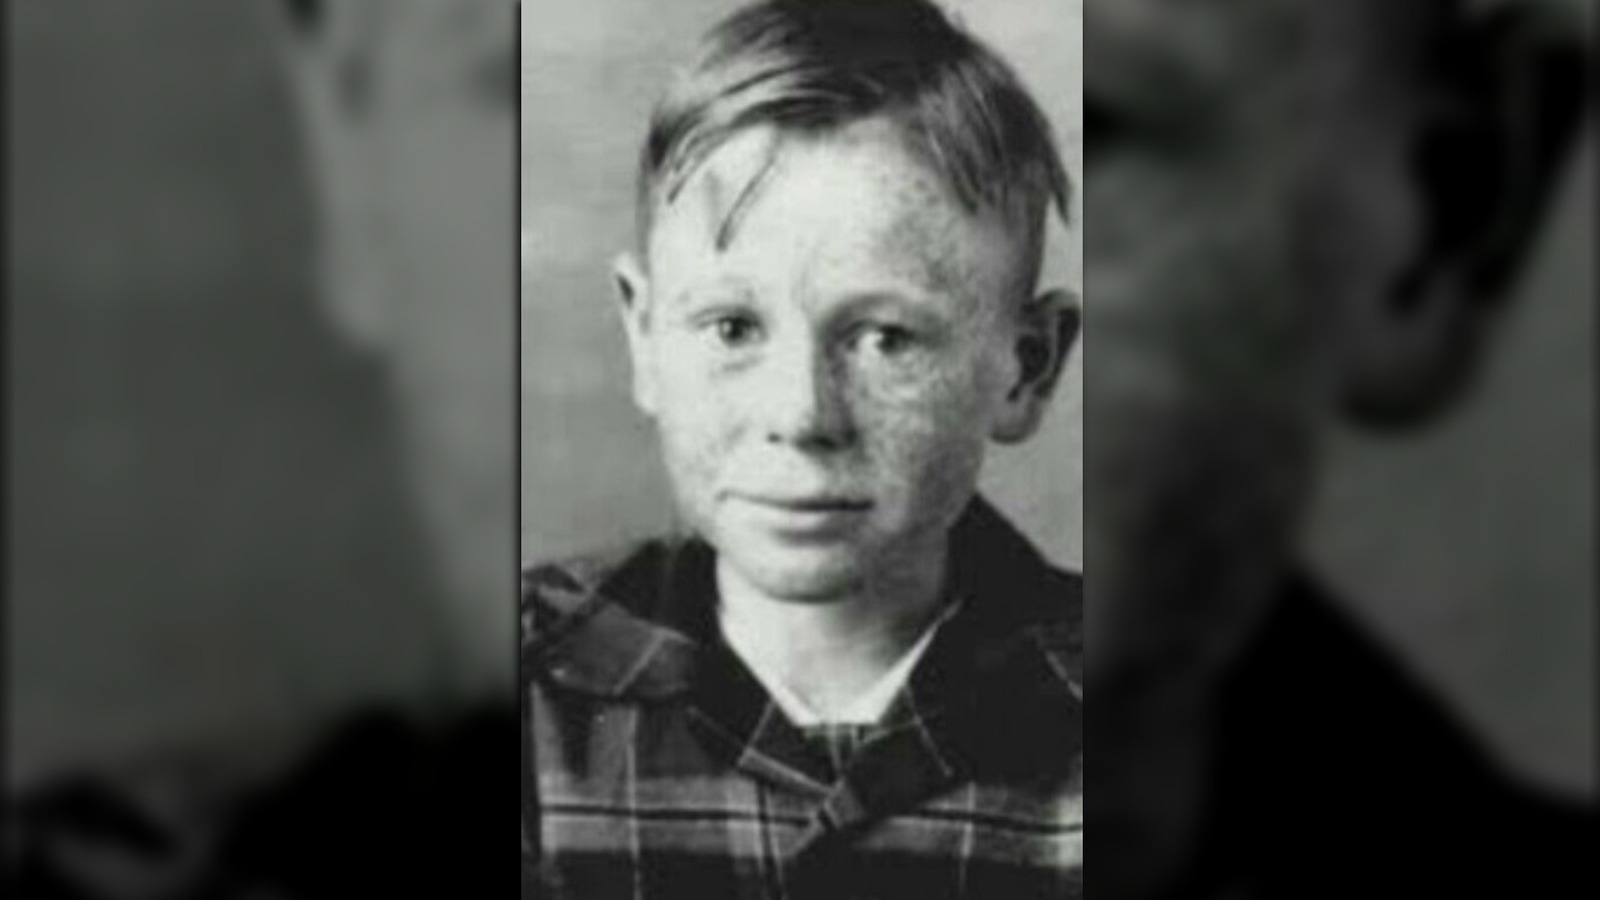 The Messed Up Childhood Of Ed Gein